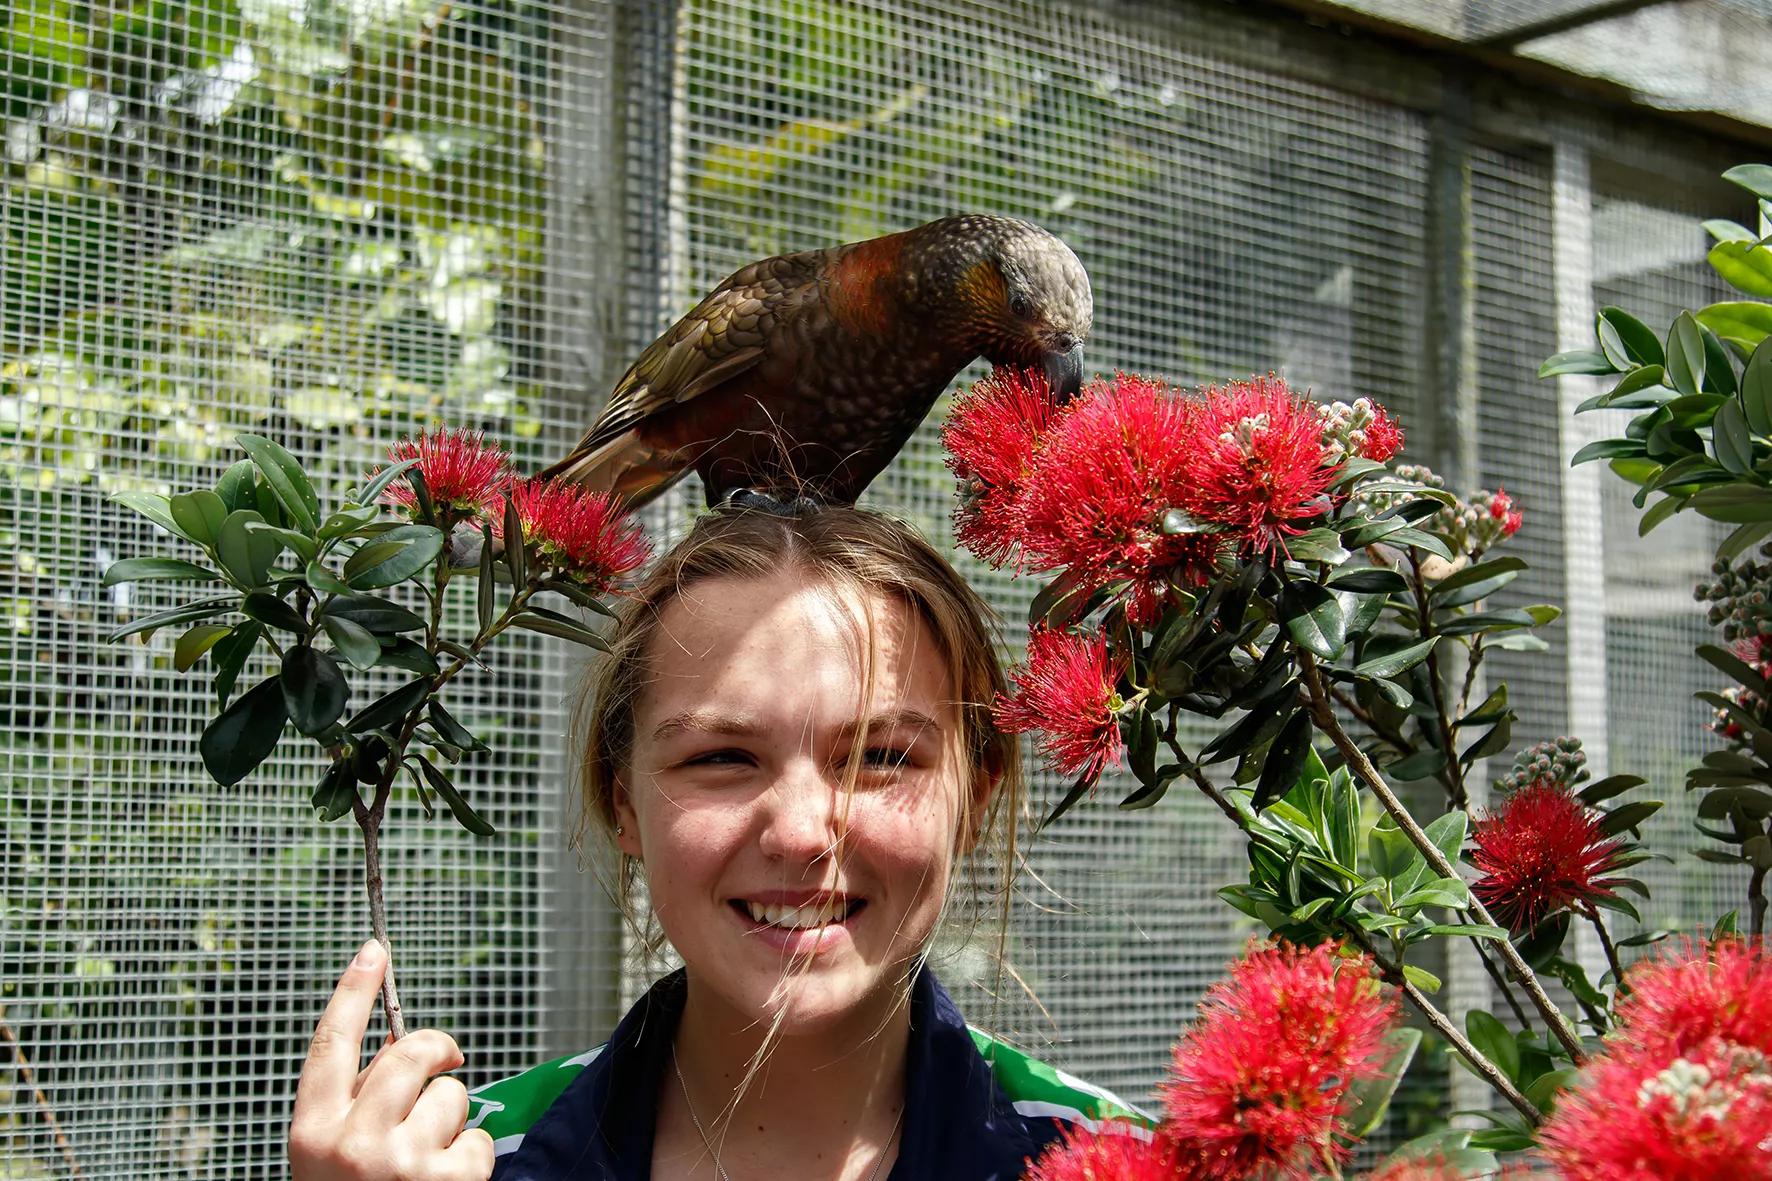 A person standing amongst pōhutukawa leaves, with a Kāka perched on their head.